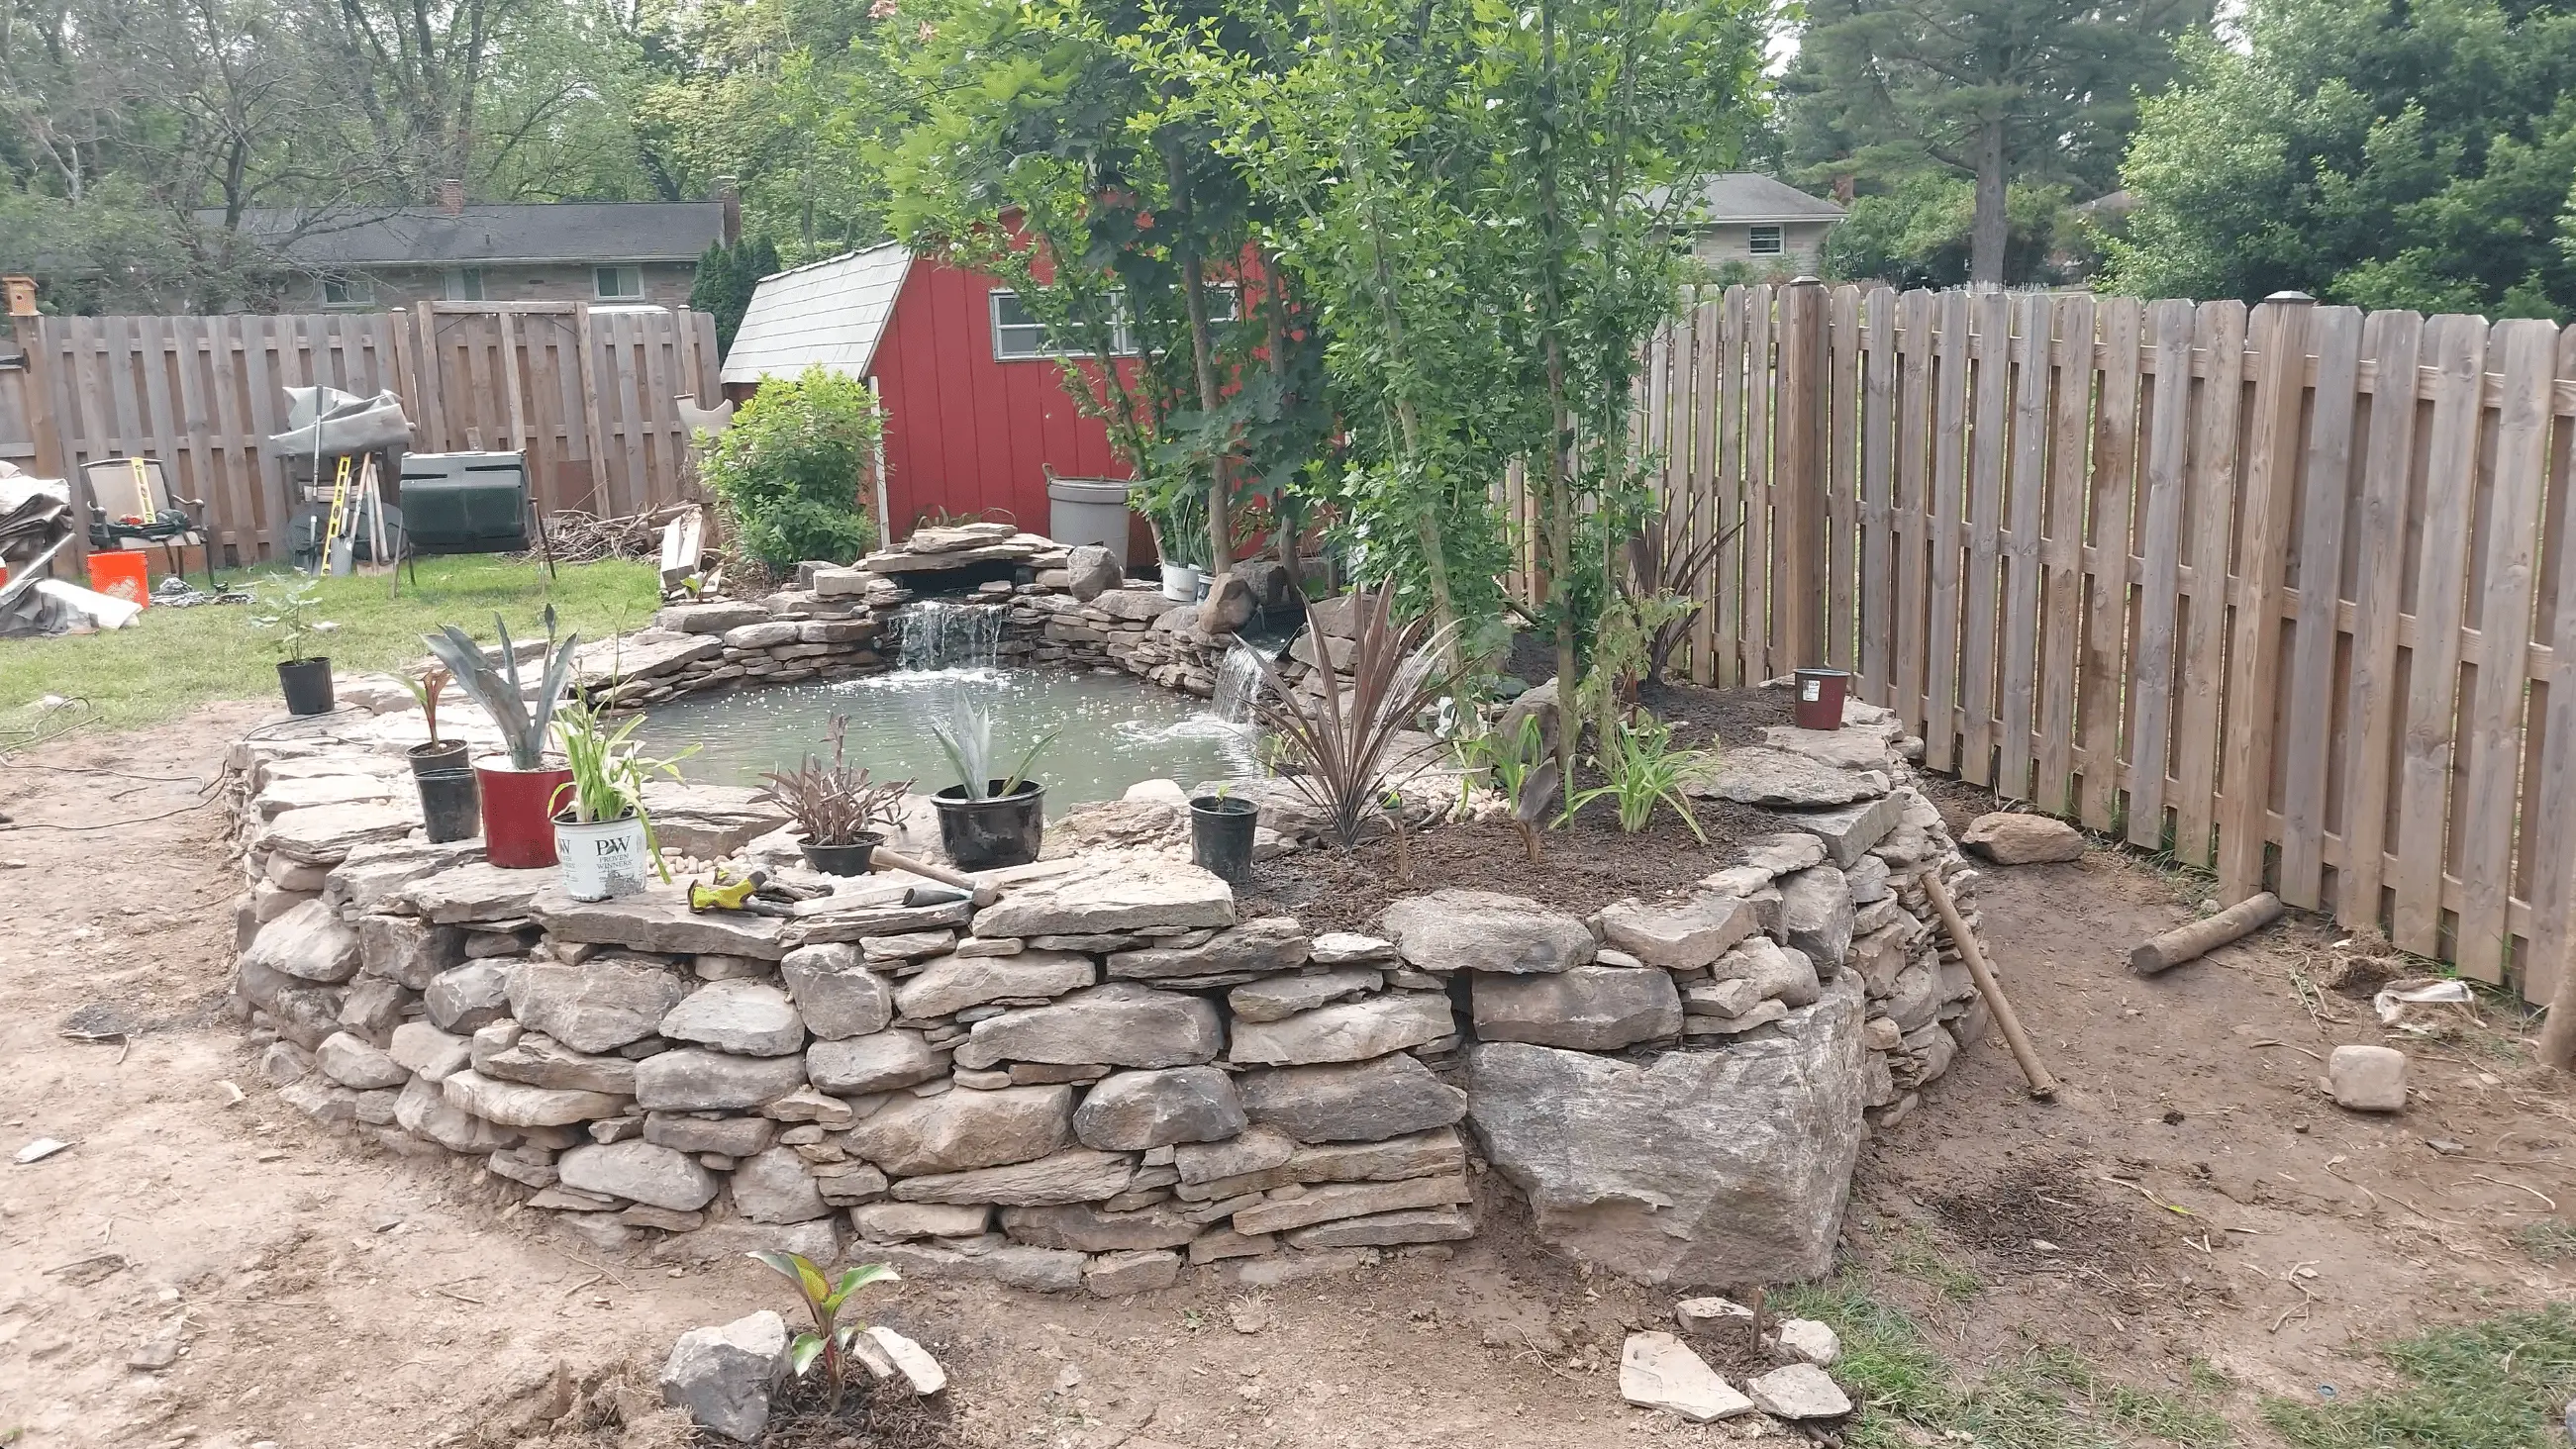 A large raised koi pond built in Ellicott City, MD. 
					We installed two Aquascape Biofalls Filters as our clients were planning on adding a lot of fish which would produce a lot of bioload.
					We also installed two skimmers to prevent any debris from accumulating at the bottom of the pond. Like a pool skimmer, pond skimmers suck debris that fall into the pond such as leaves
					and twigs into its basket for easy removal.
																																